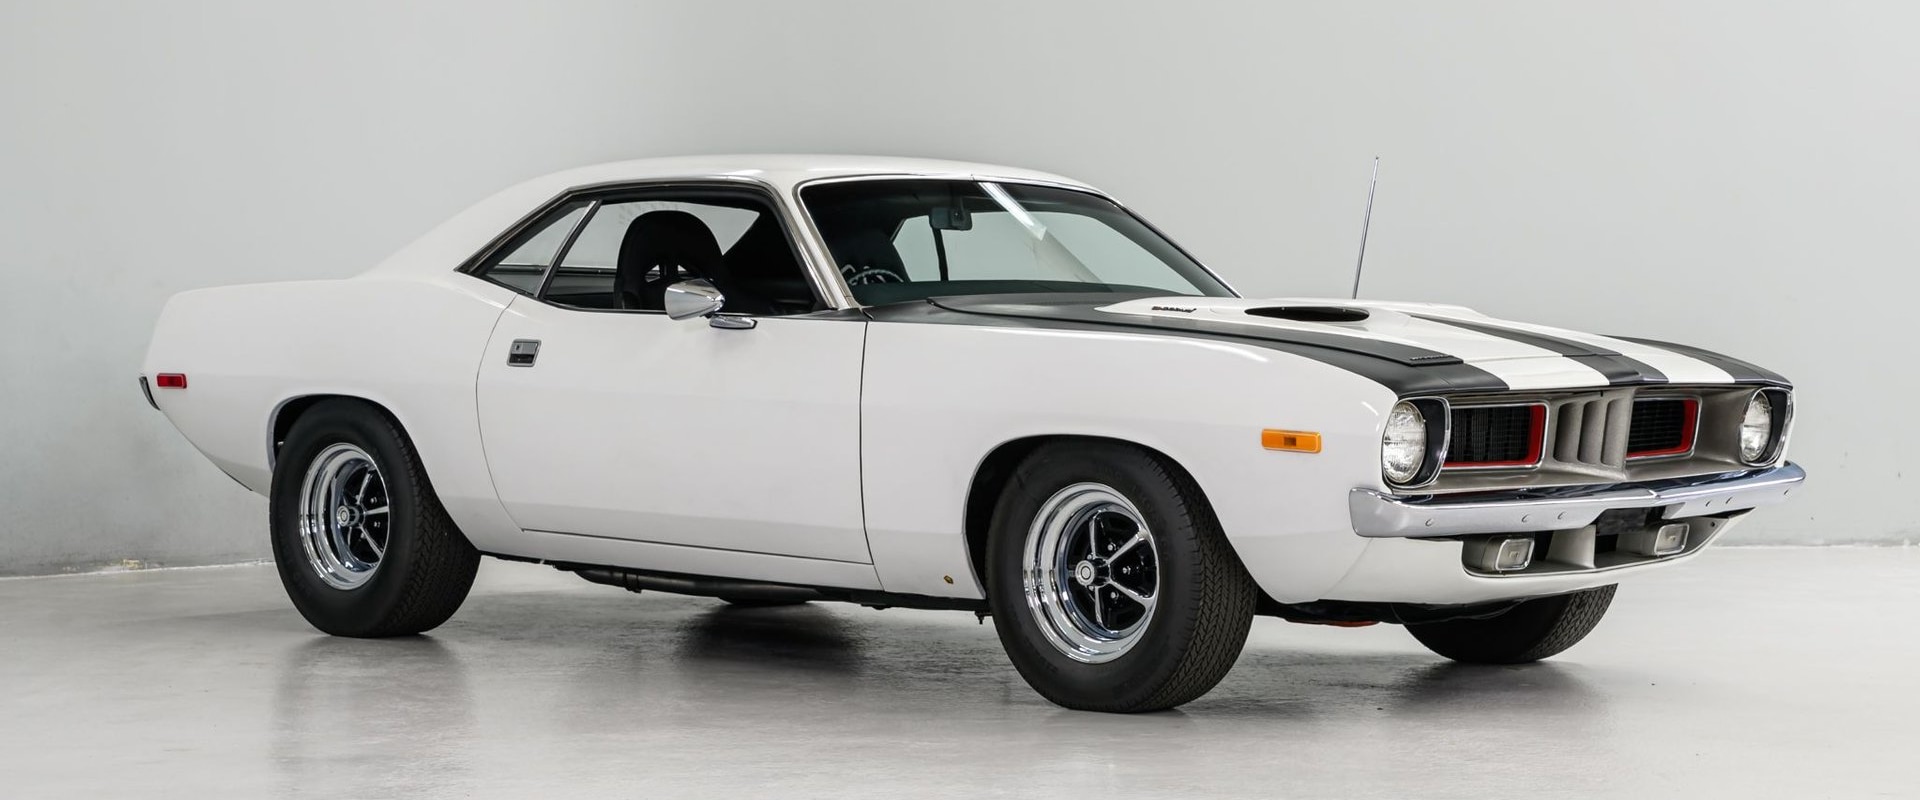 Plymouth Barracuda: A Comprehensive Overview of the Mopar Muscle Car